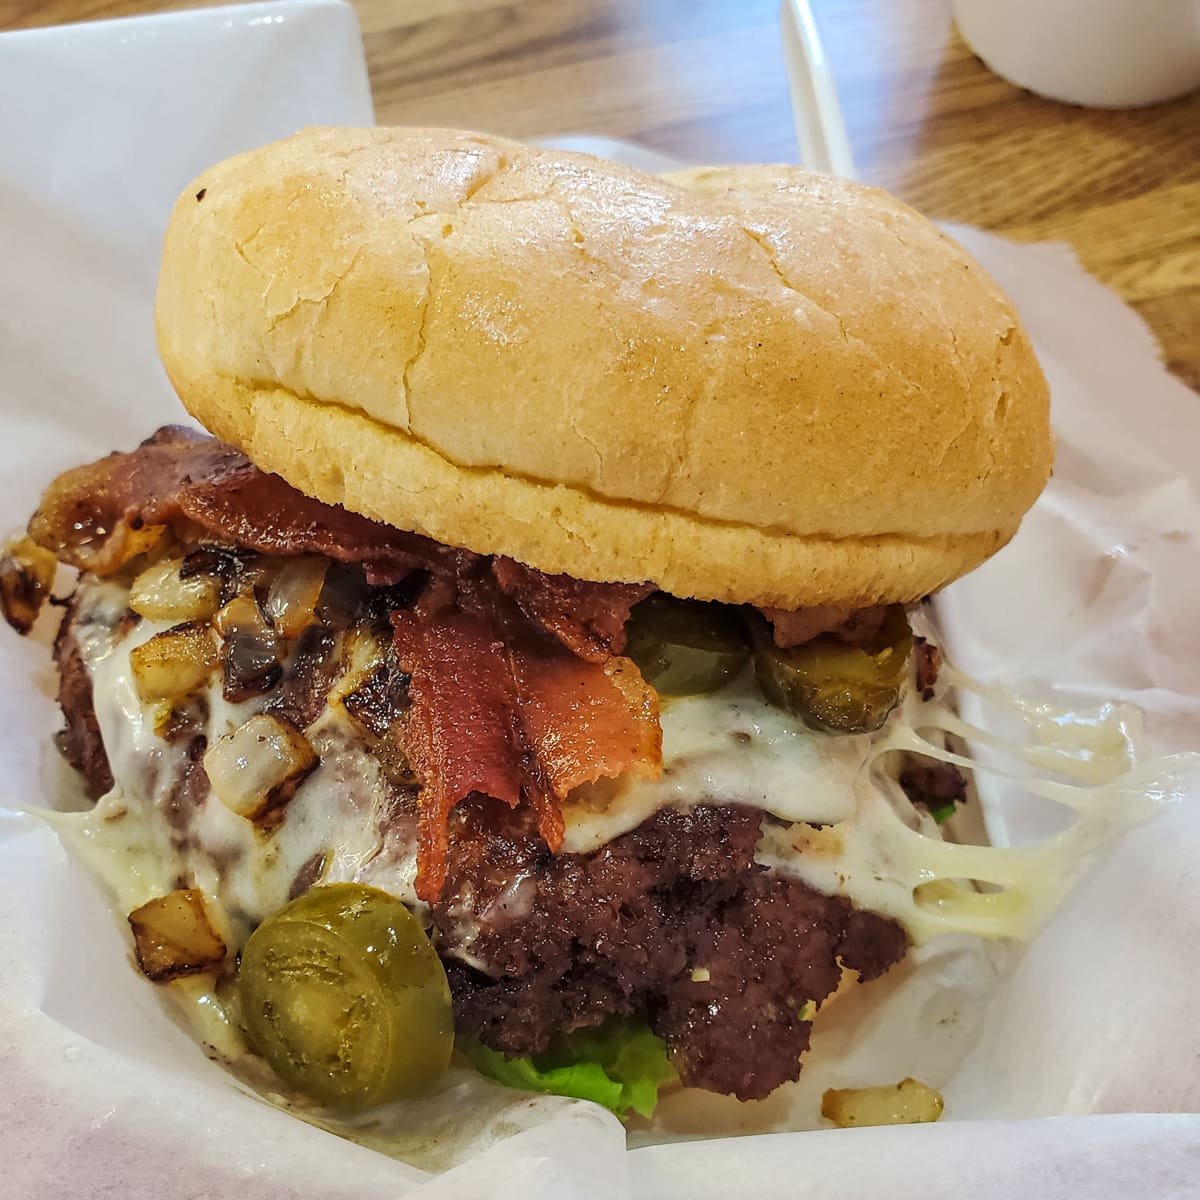 The Bobby Burger from Snack Shack on Johnson Drive.